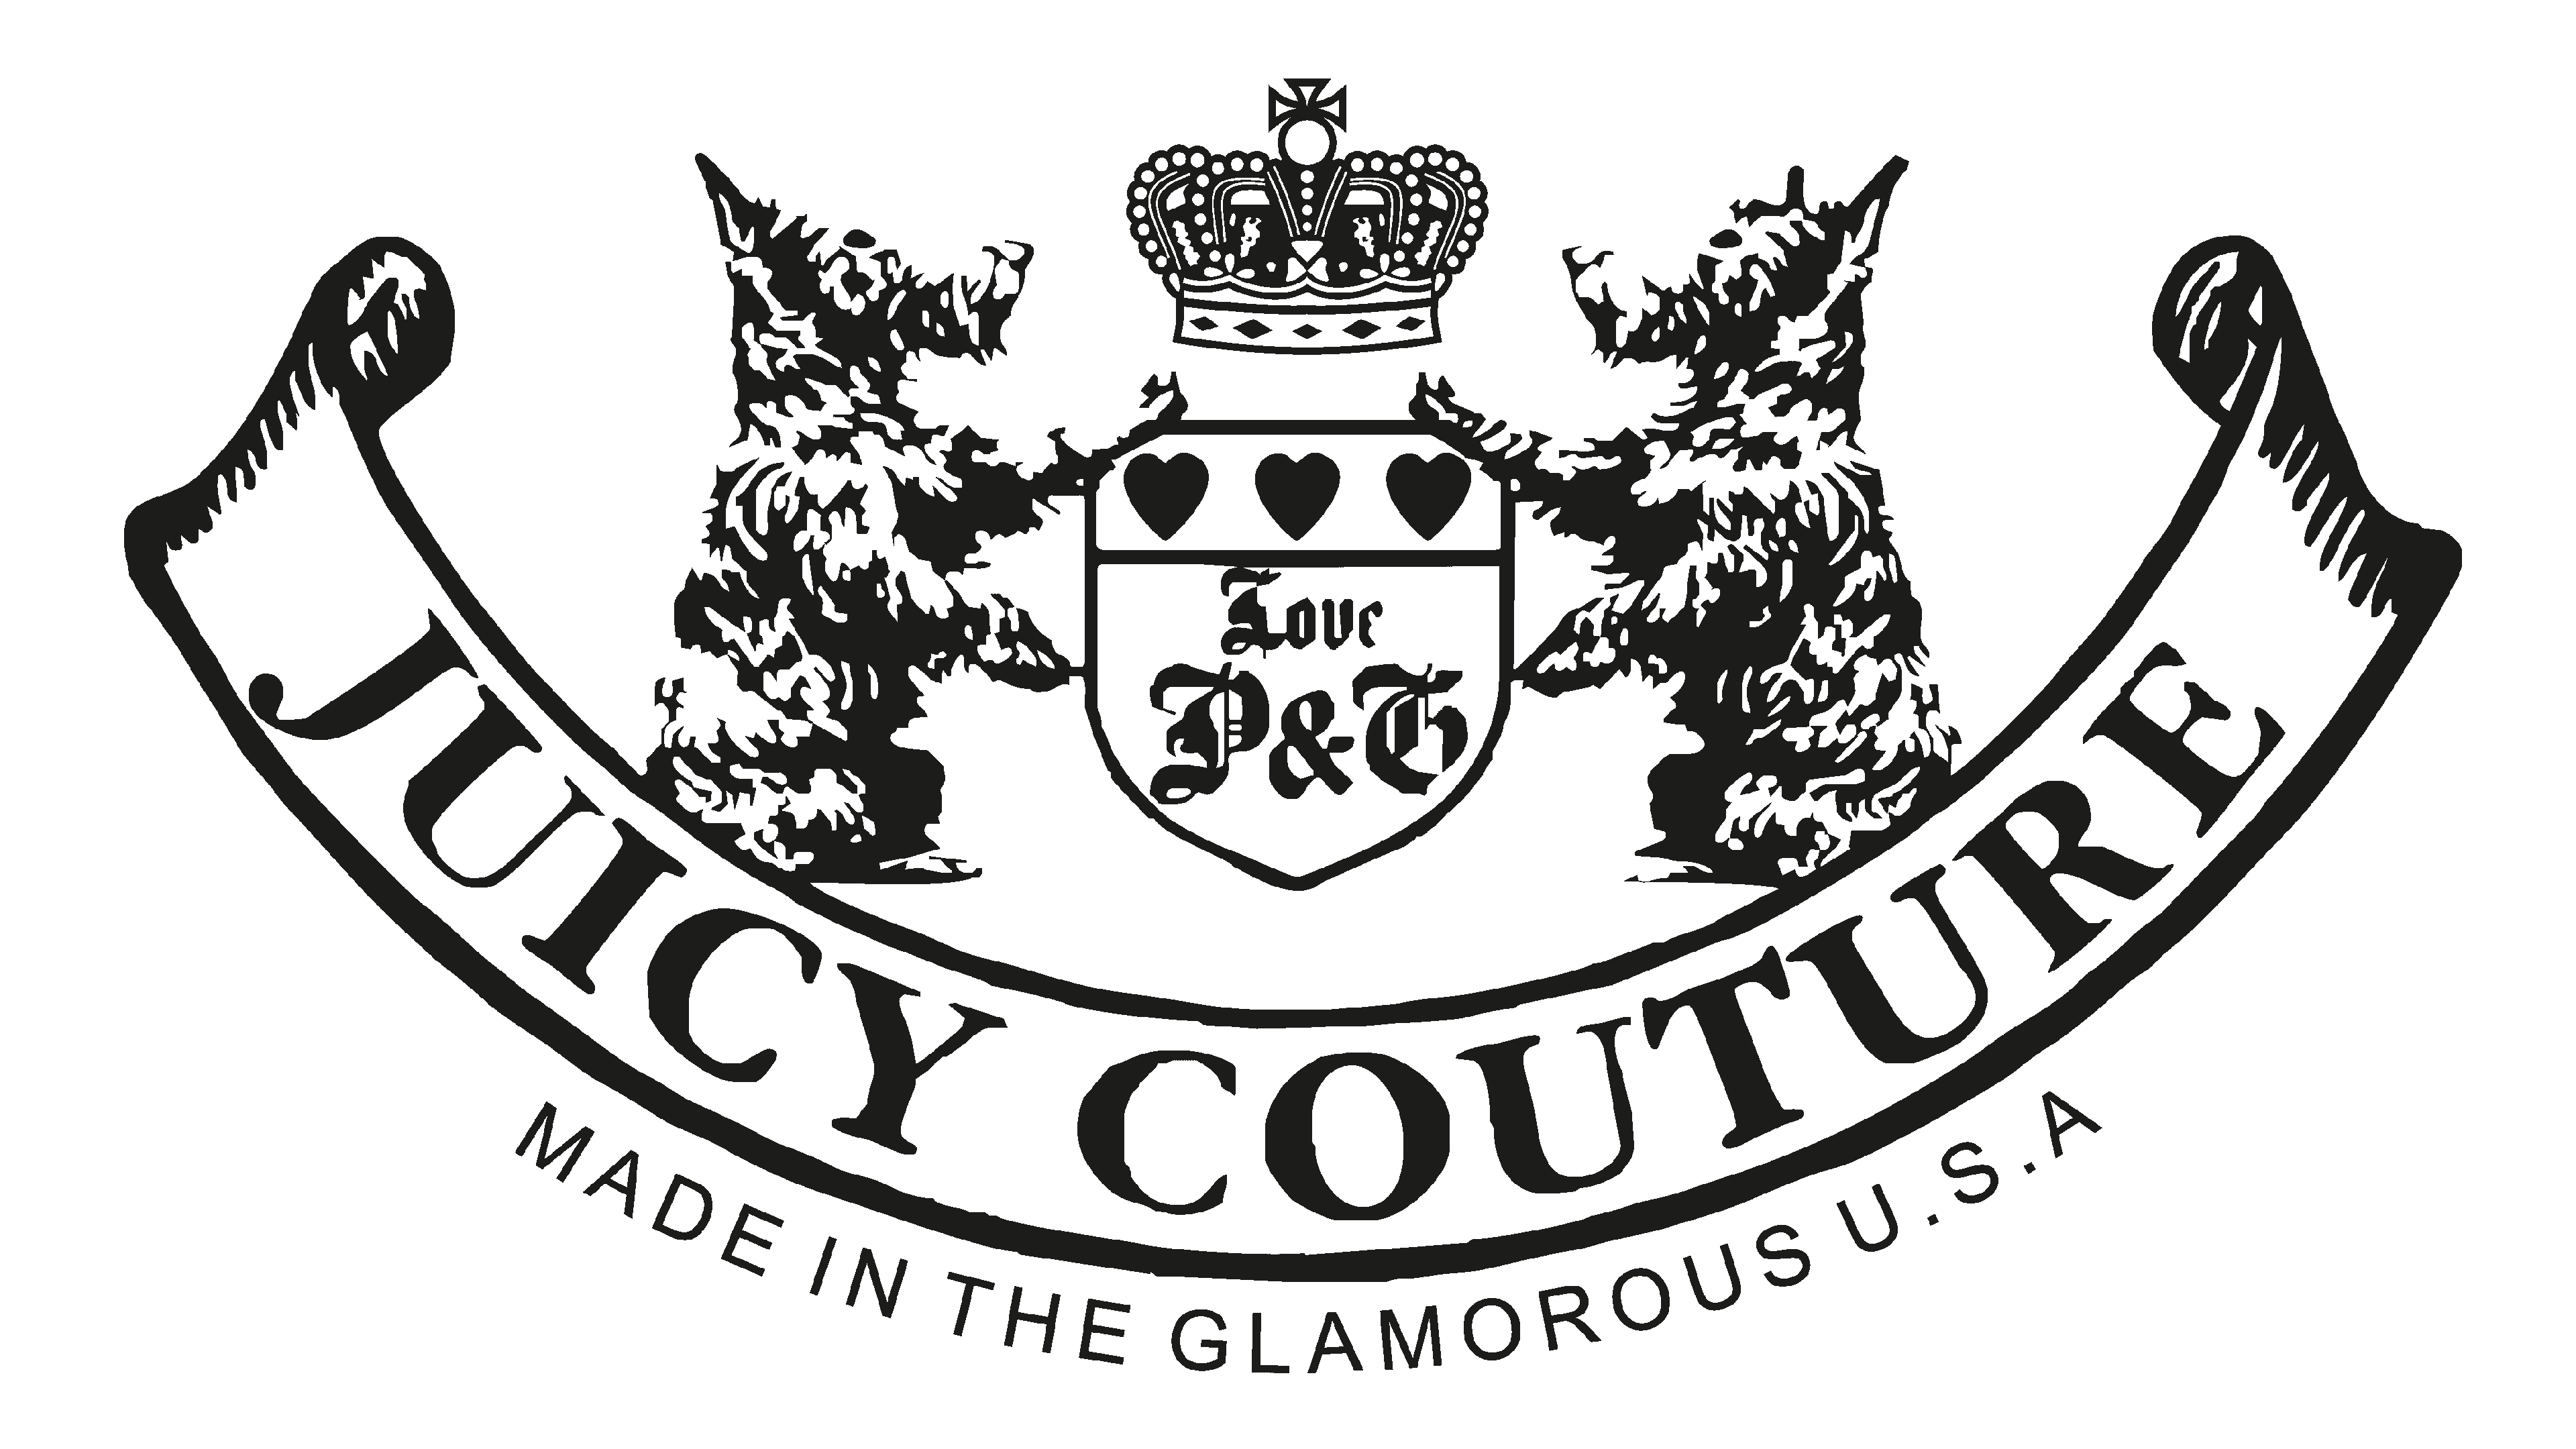 juicy couture logo